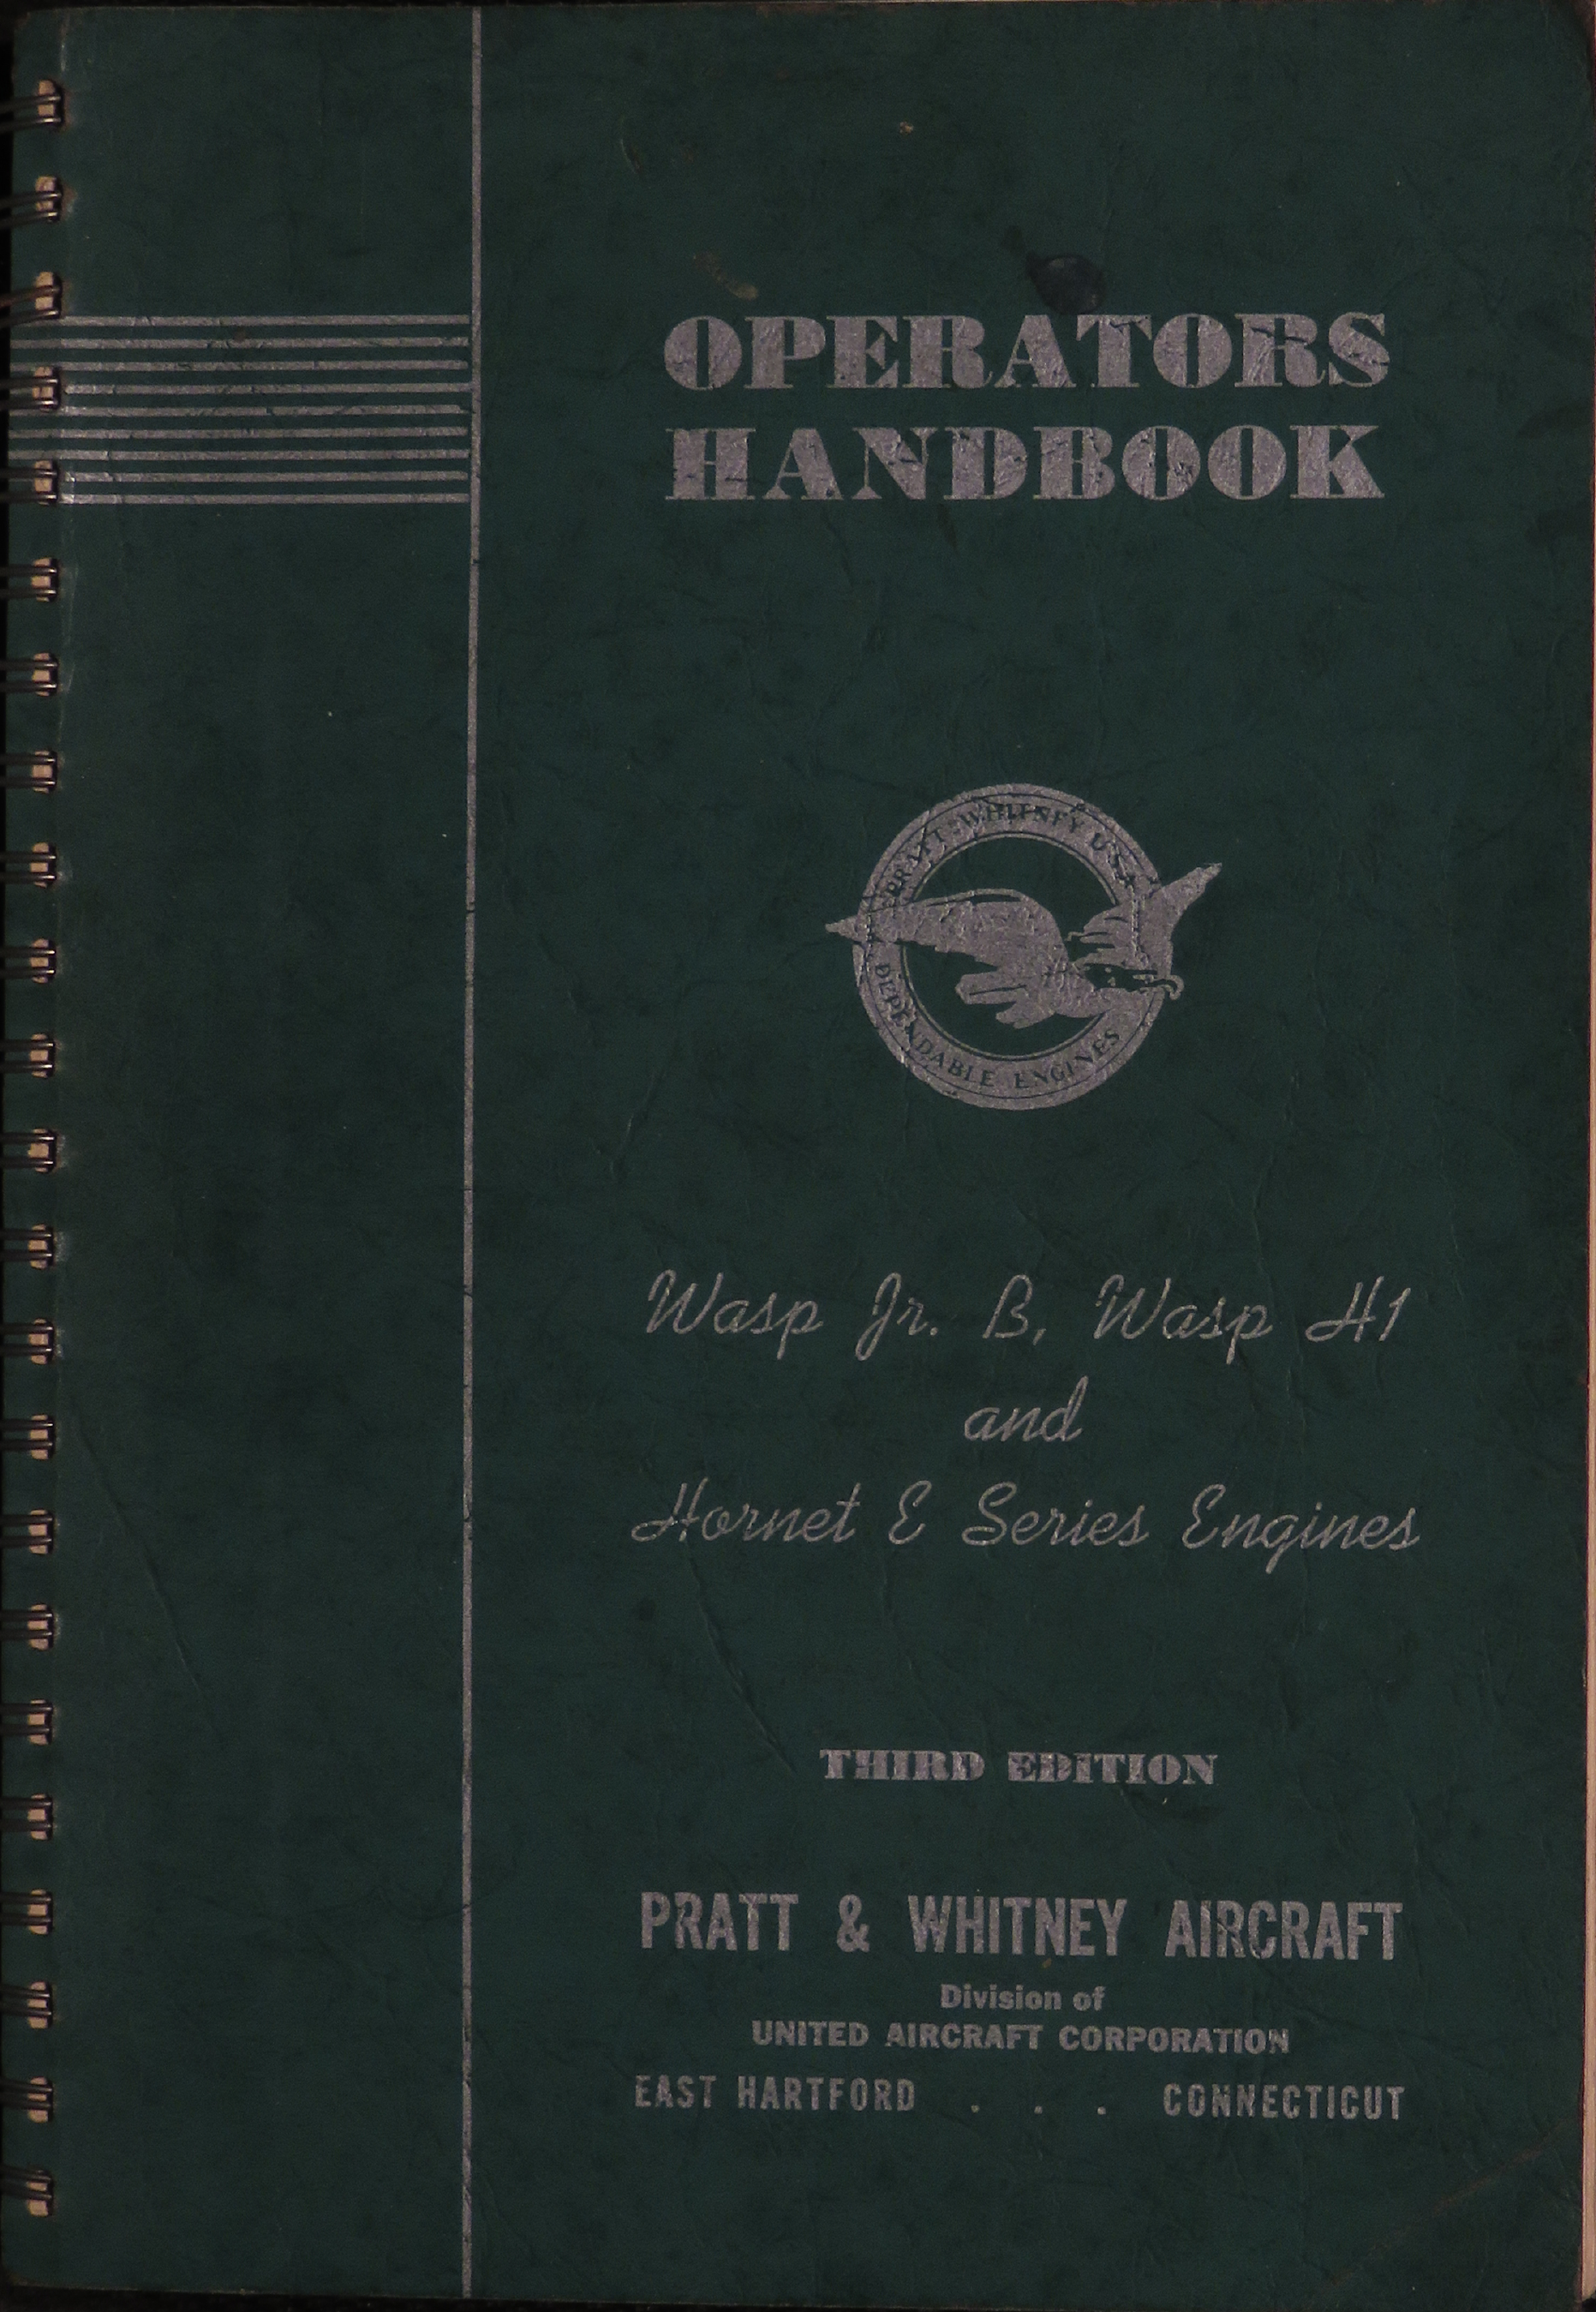 Sample page 1 from AirCorps Library document: Operators Handbook for Wasp Jr, Wasp H1, and Hornet E Series Engines